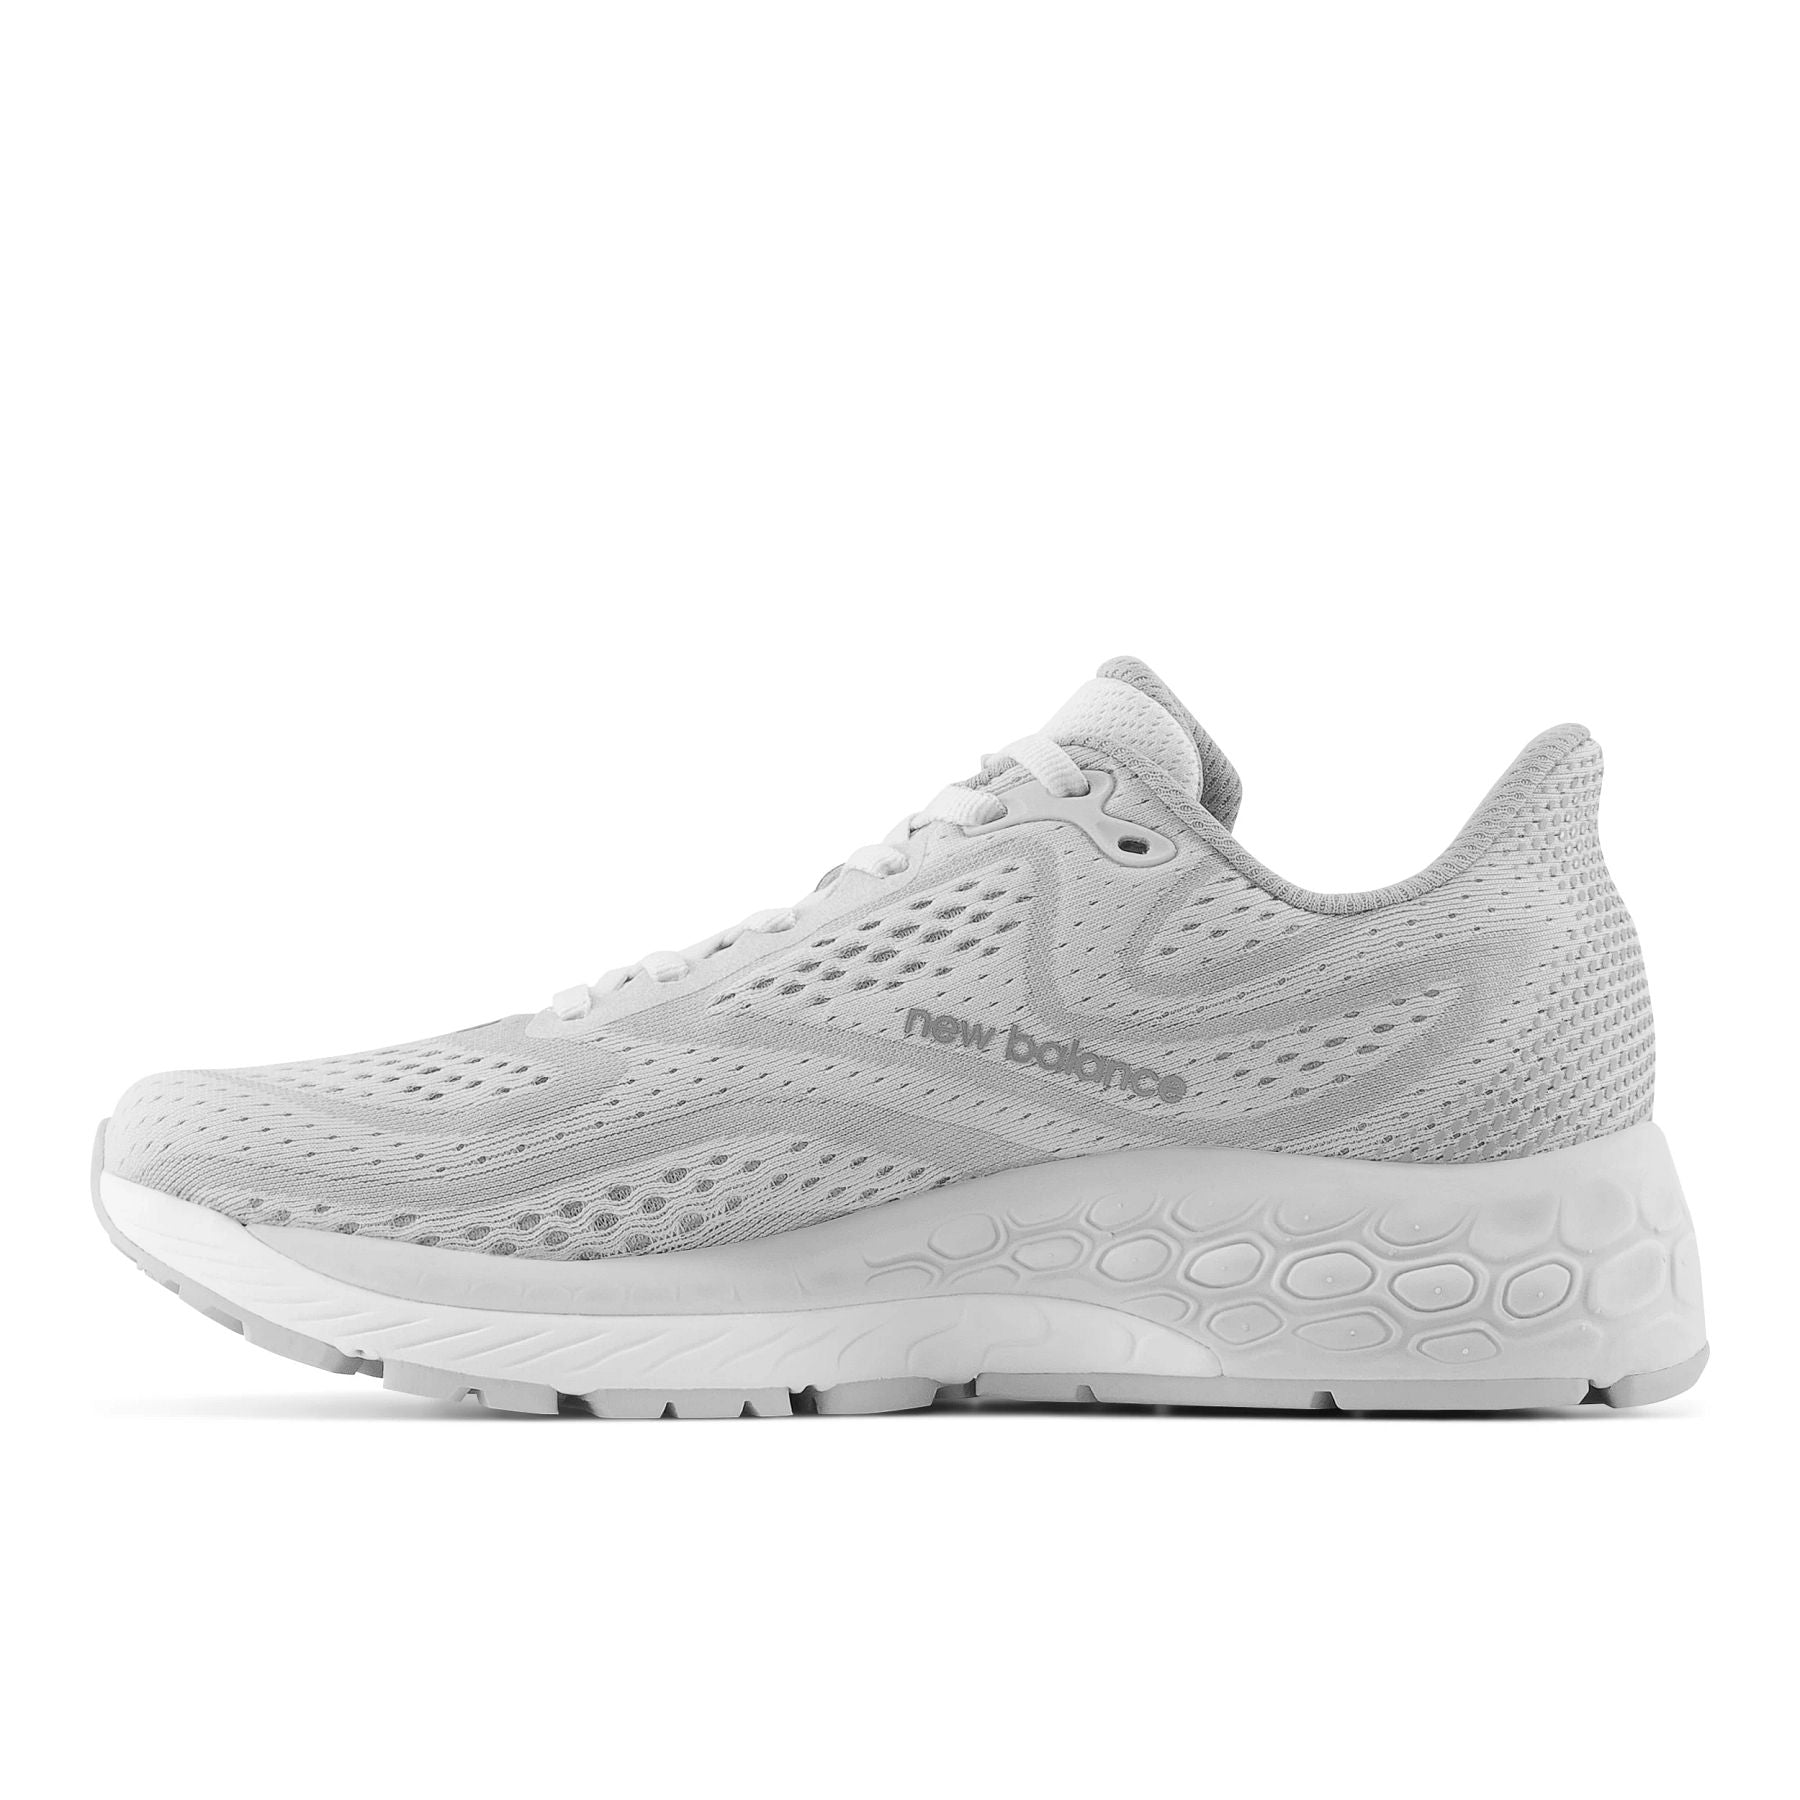 Medial view of the Women's 880 V13 by New Balance in the color White/White